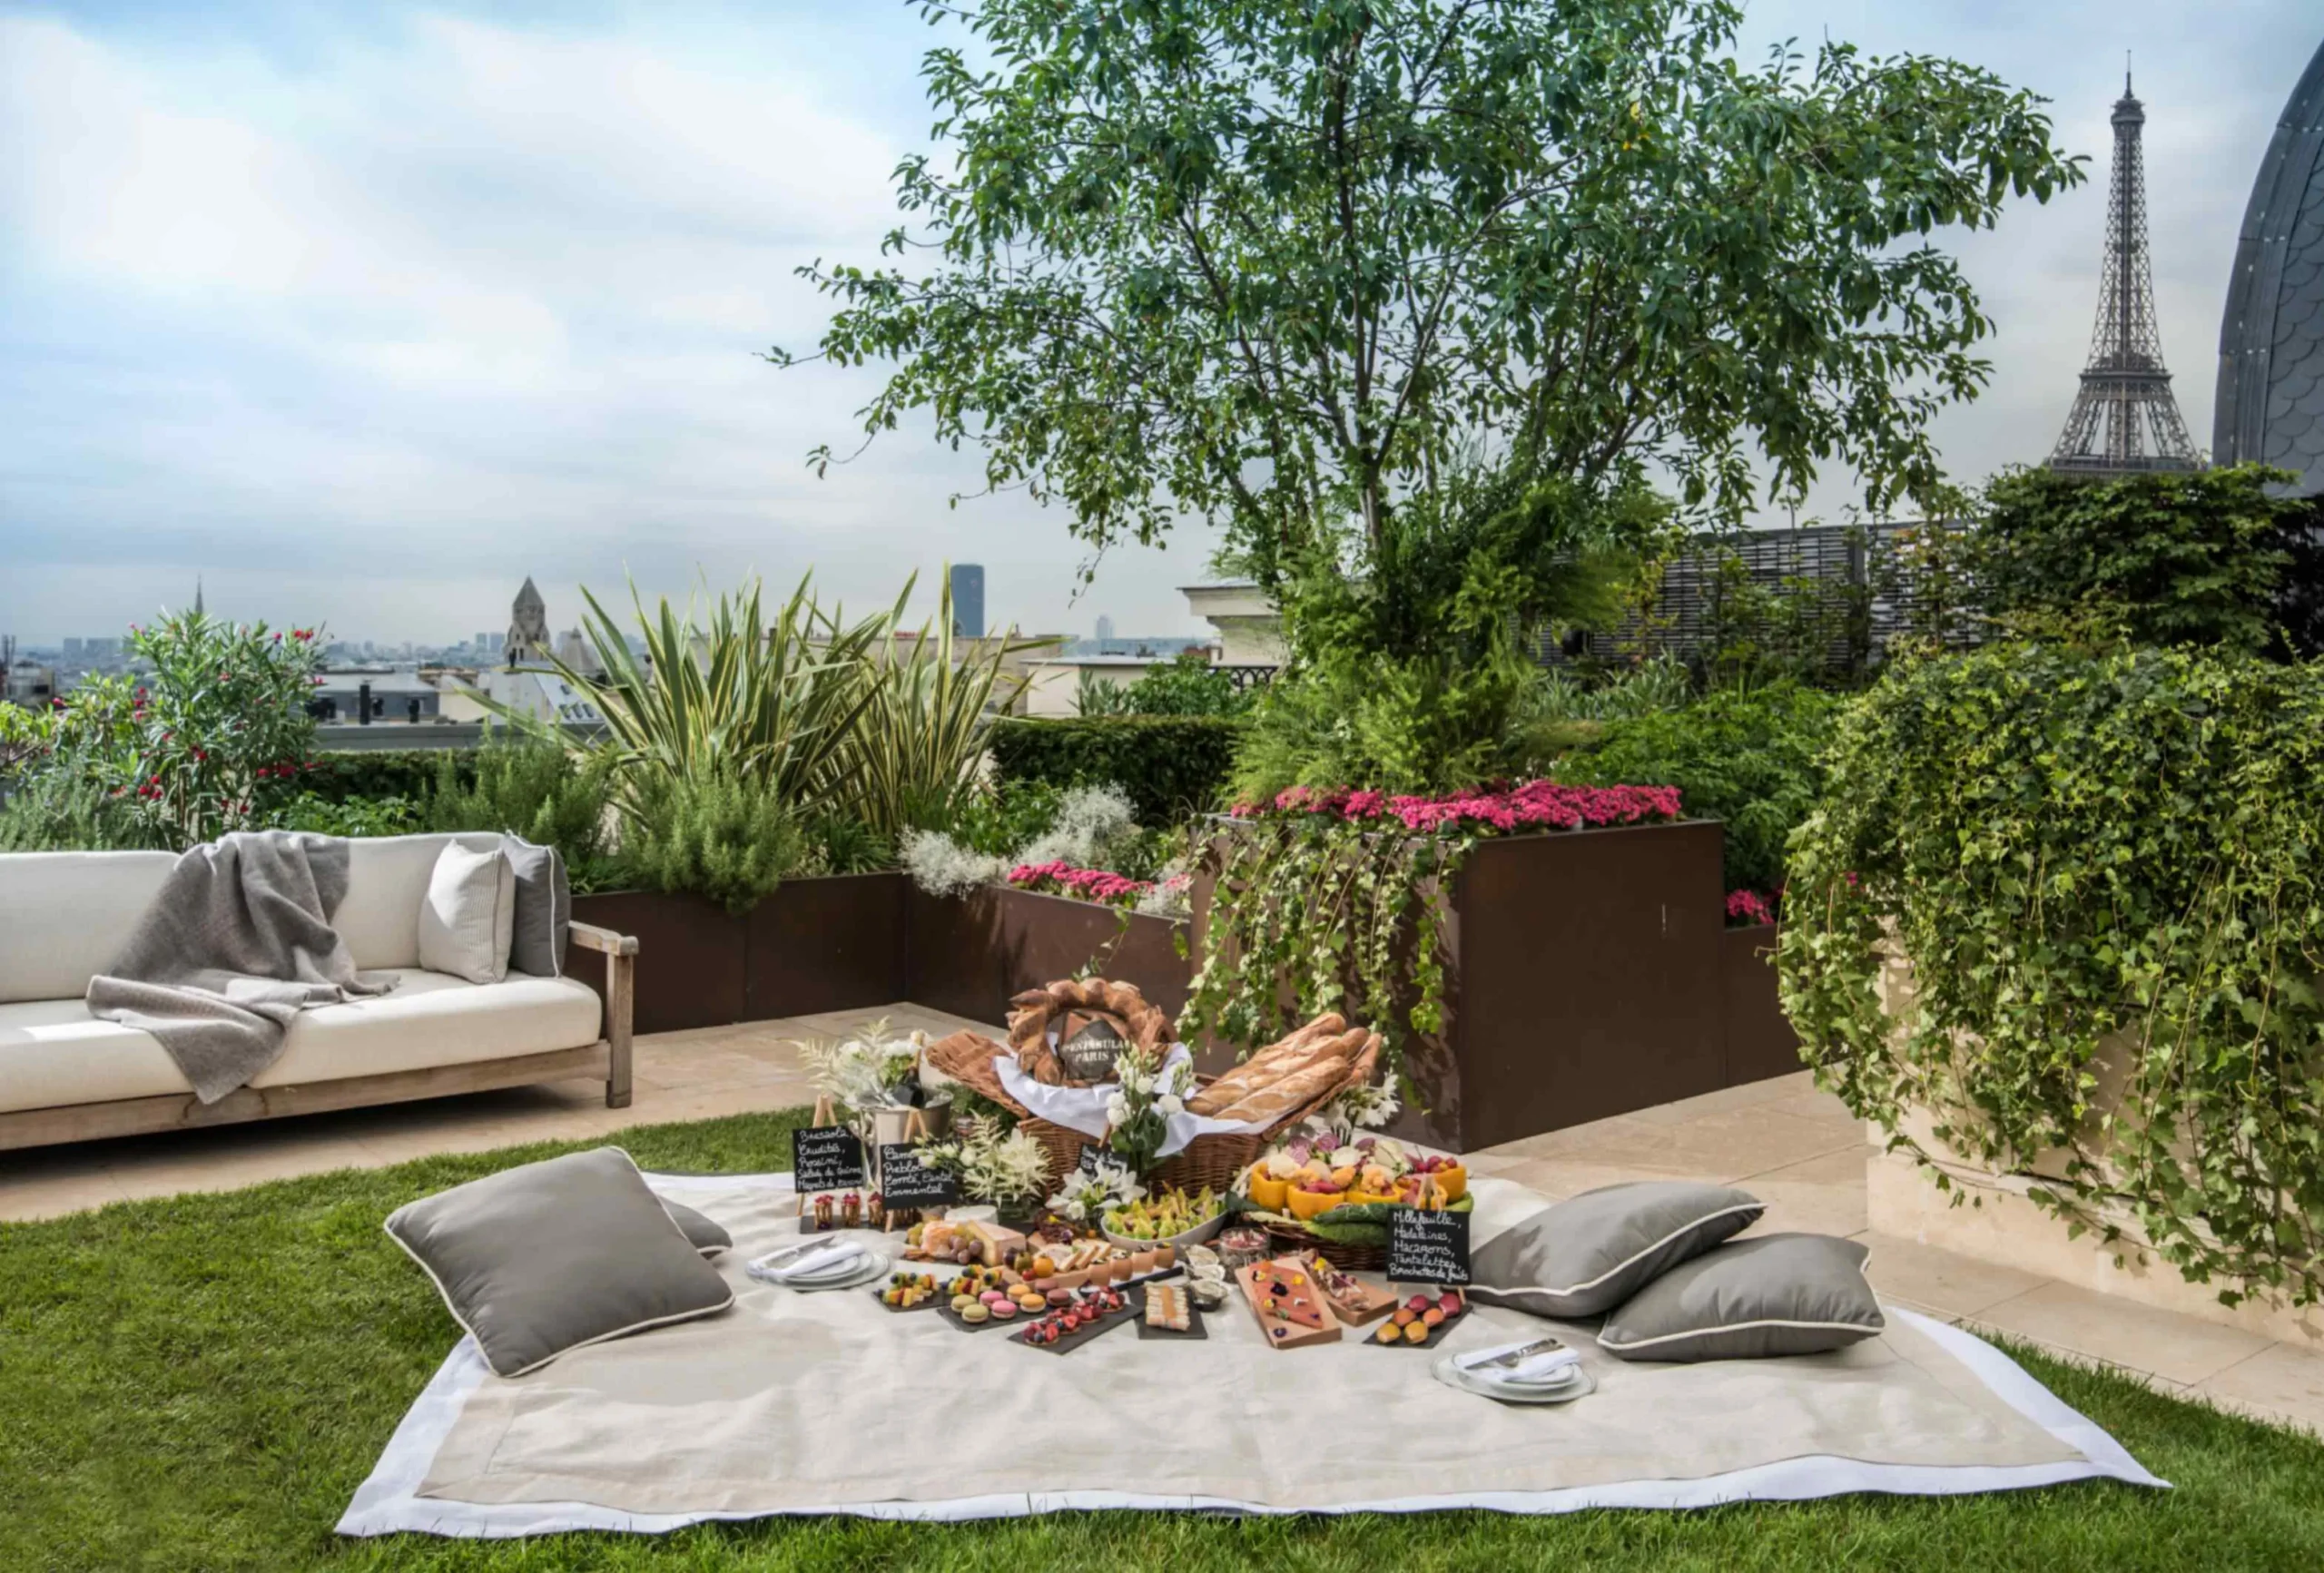 Luxurious rooftop picnic setup at Peninsula Paris, an eco-friendly hotel in Paris, with a spread of gourmet snacks on a blanket amidst lush garden greenery, offering a stunning view of the Eiffel Tower in the background.